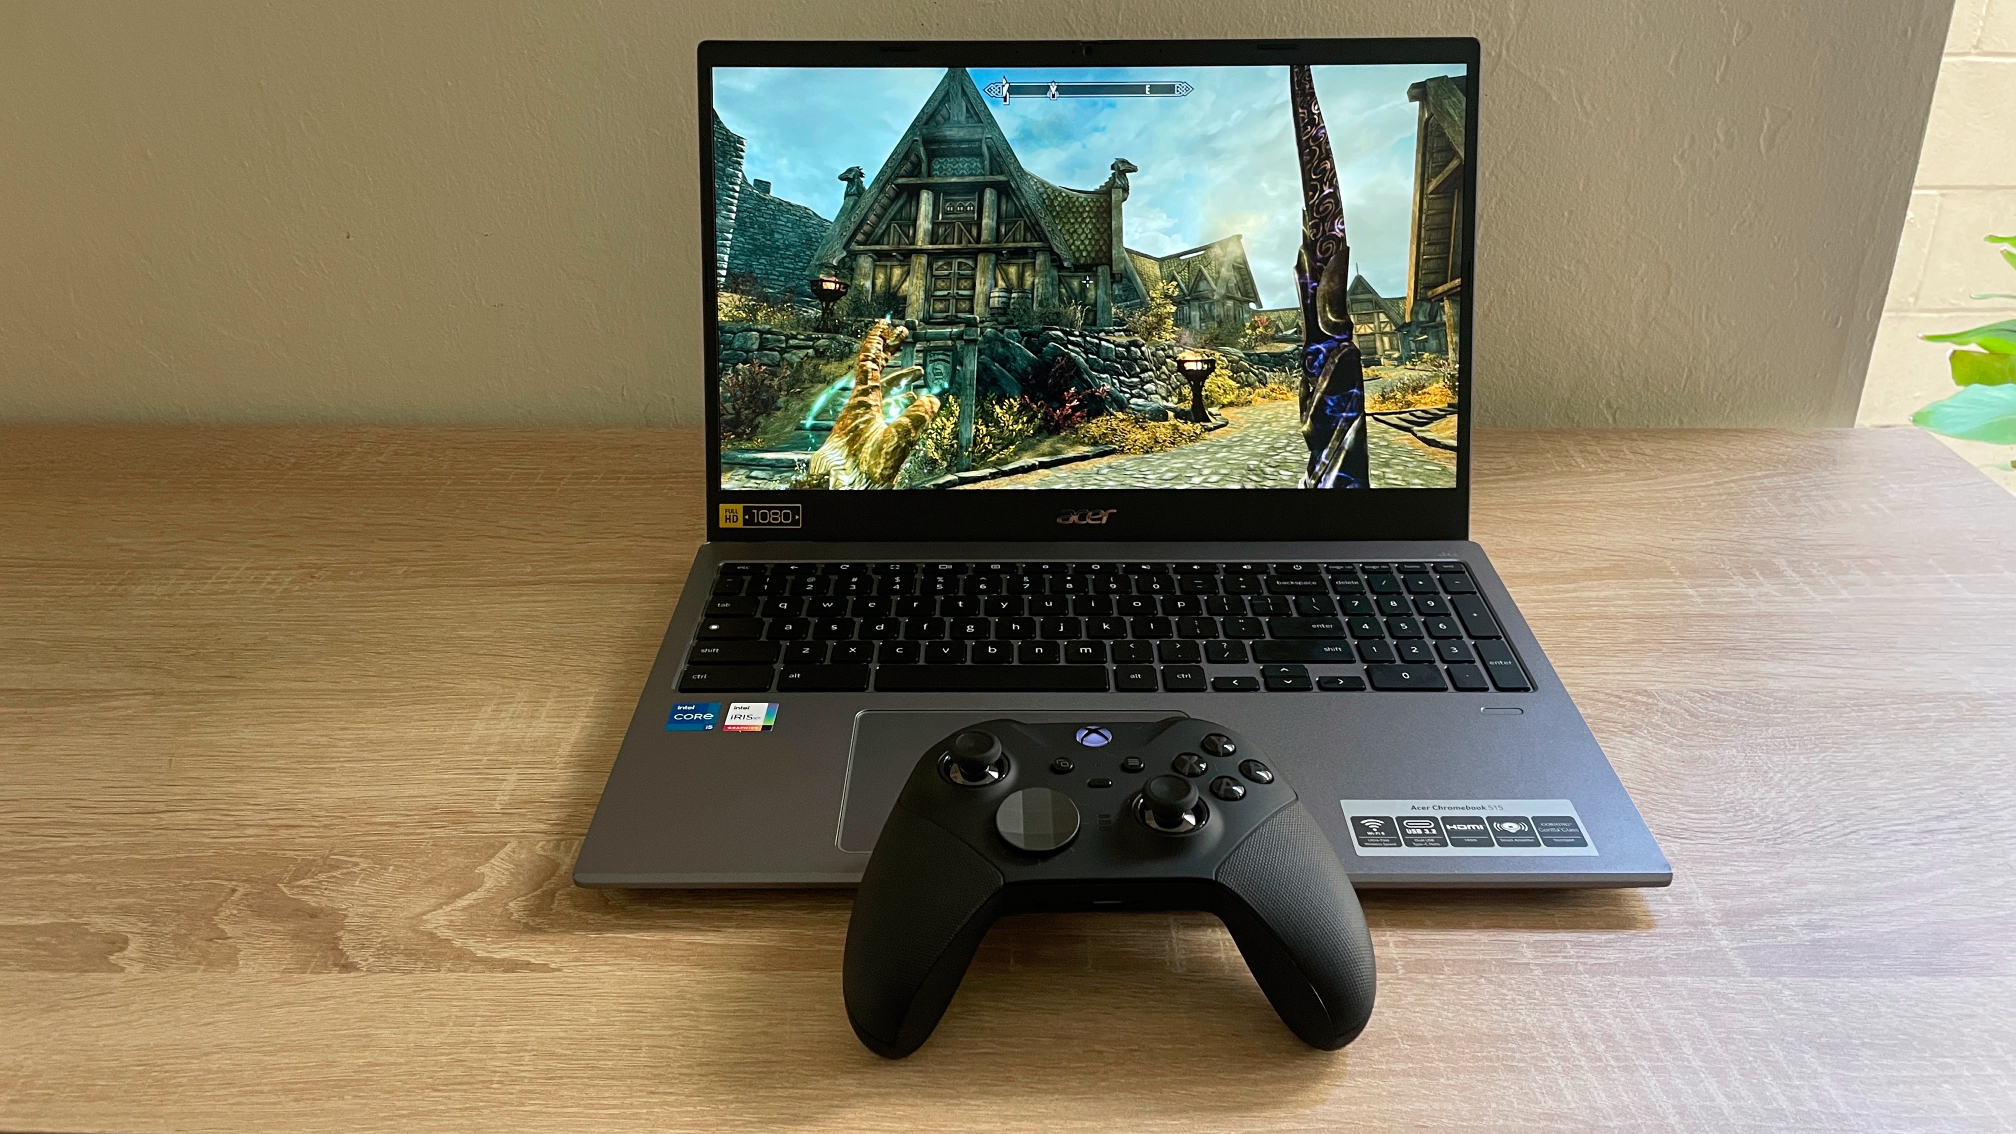 How to Play Games on Your Chromebook